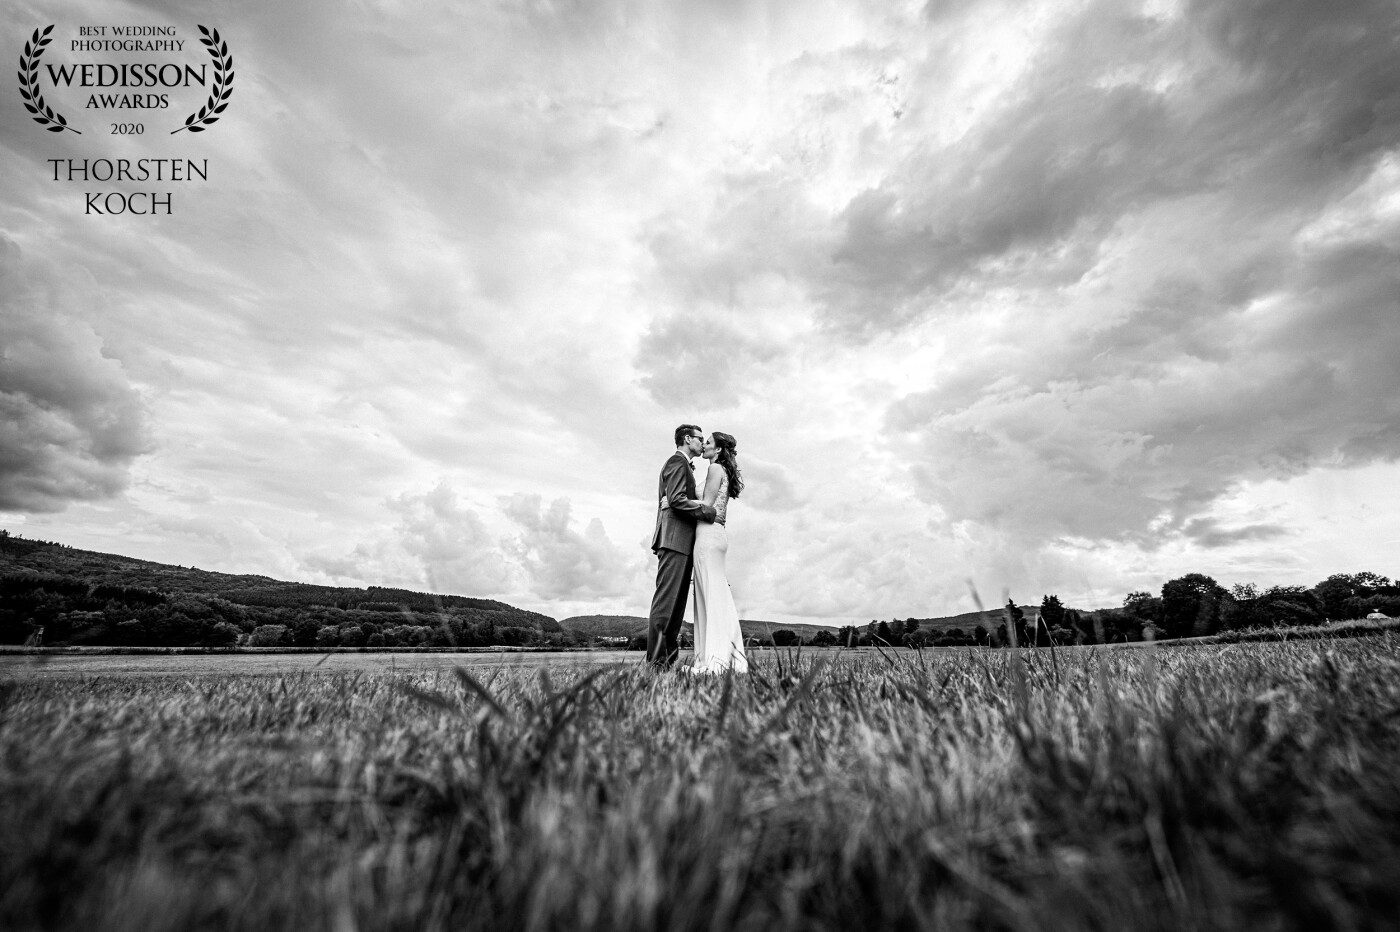 This award is very special to me because this was the first wedding this year that almost took place the way it was planned. We found this great wide area and I love cloudy skies... so we took this photo.